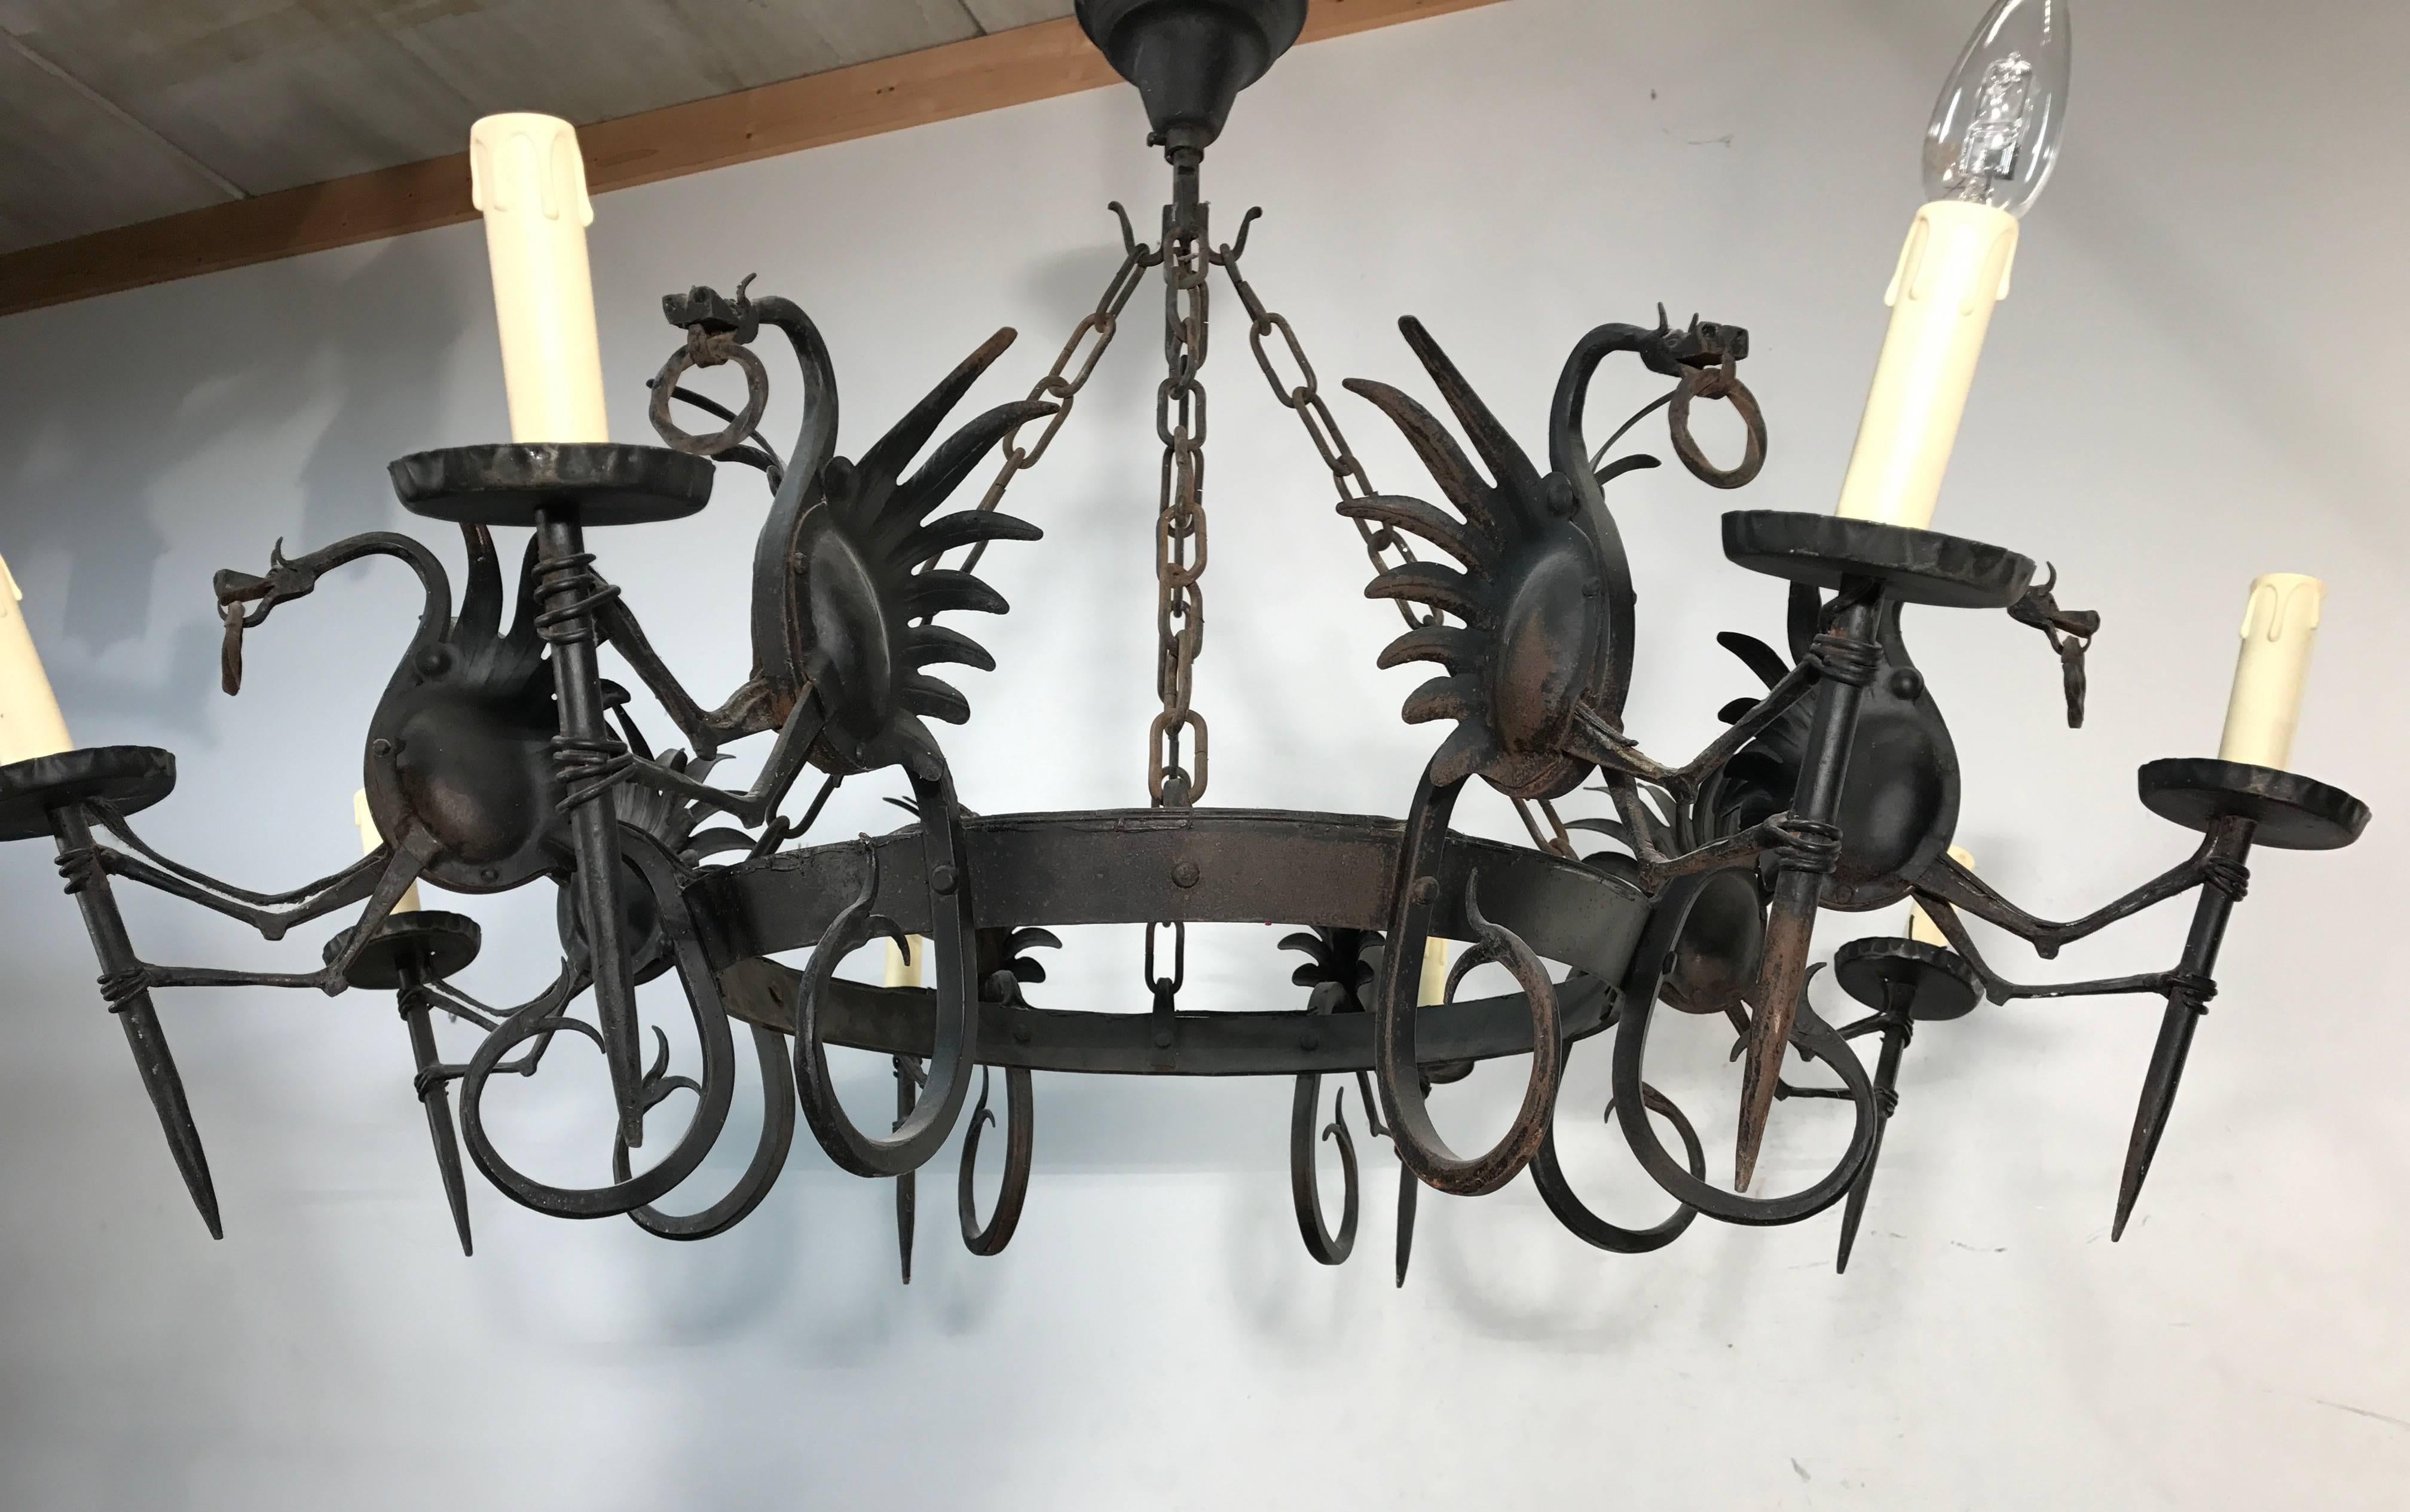 Amazing and skillfully made wrought iron pendant.

This artistically designed and very well executed wrought iron dragon chandelier is in excellent condition and it comes with stunning and mint dragons on all eight arms. If you are looking for a